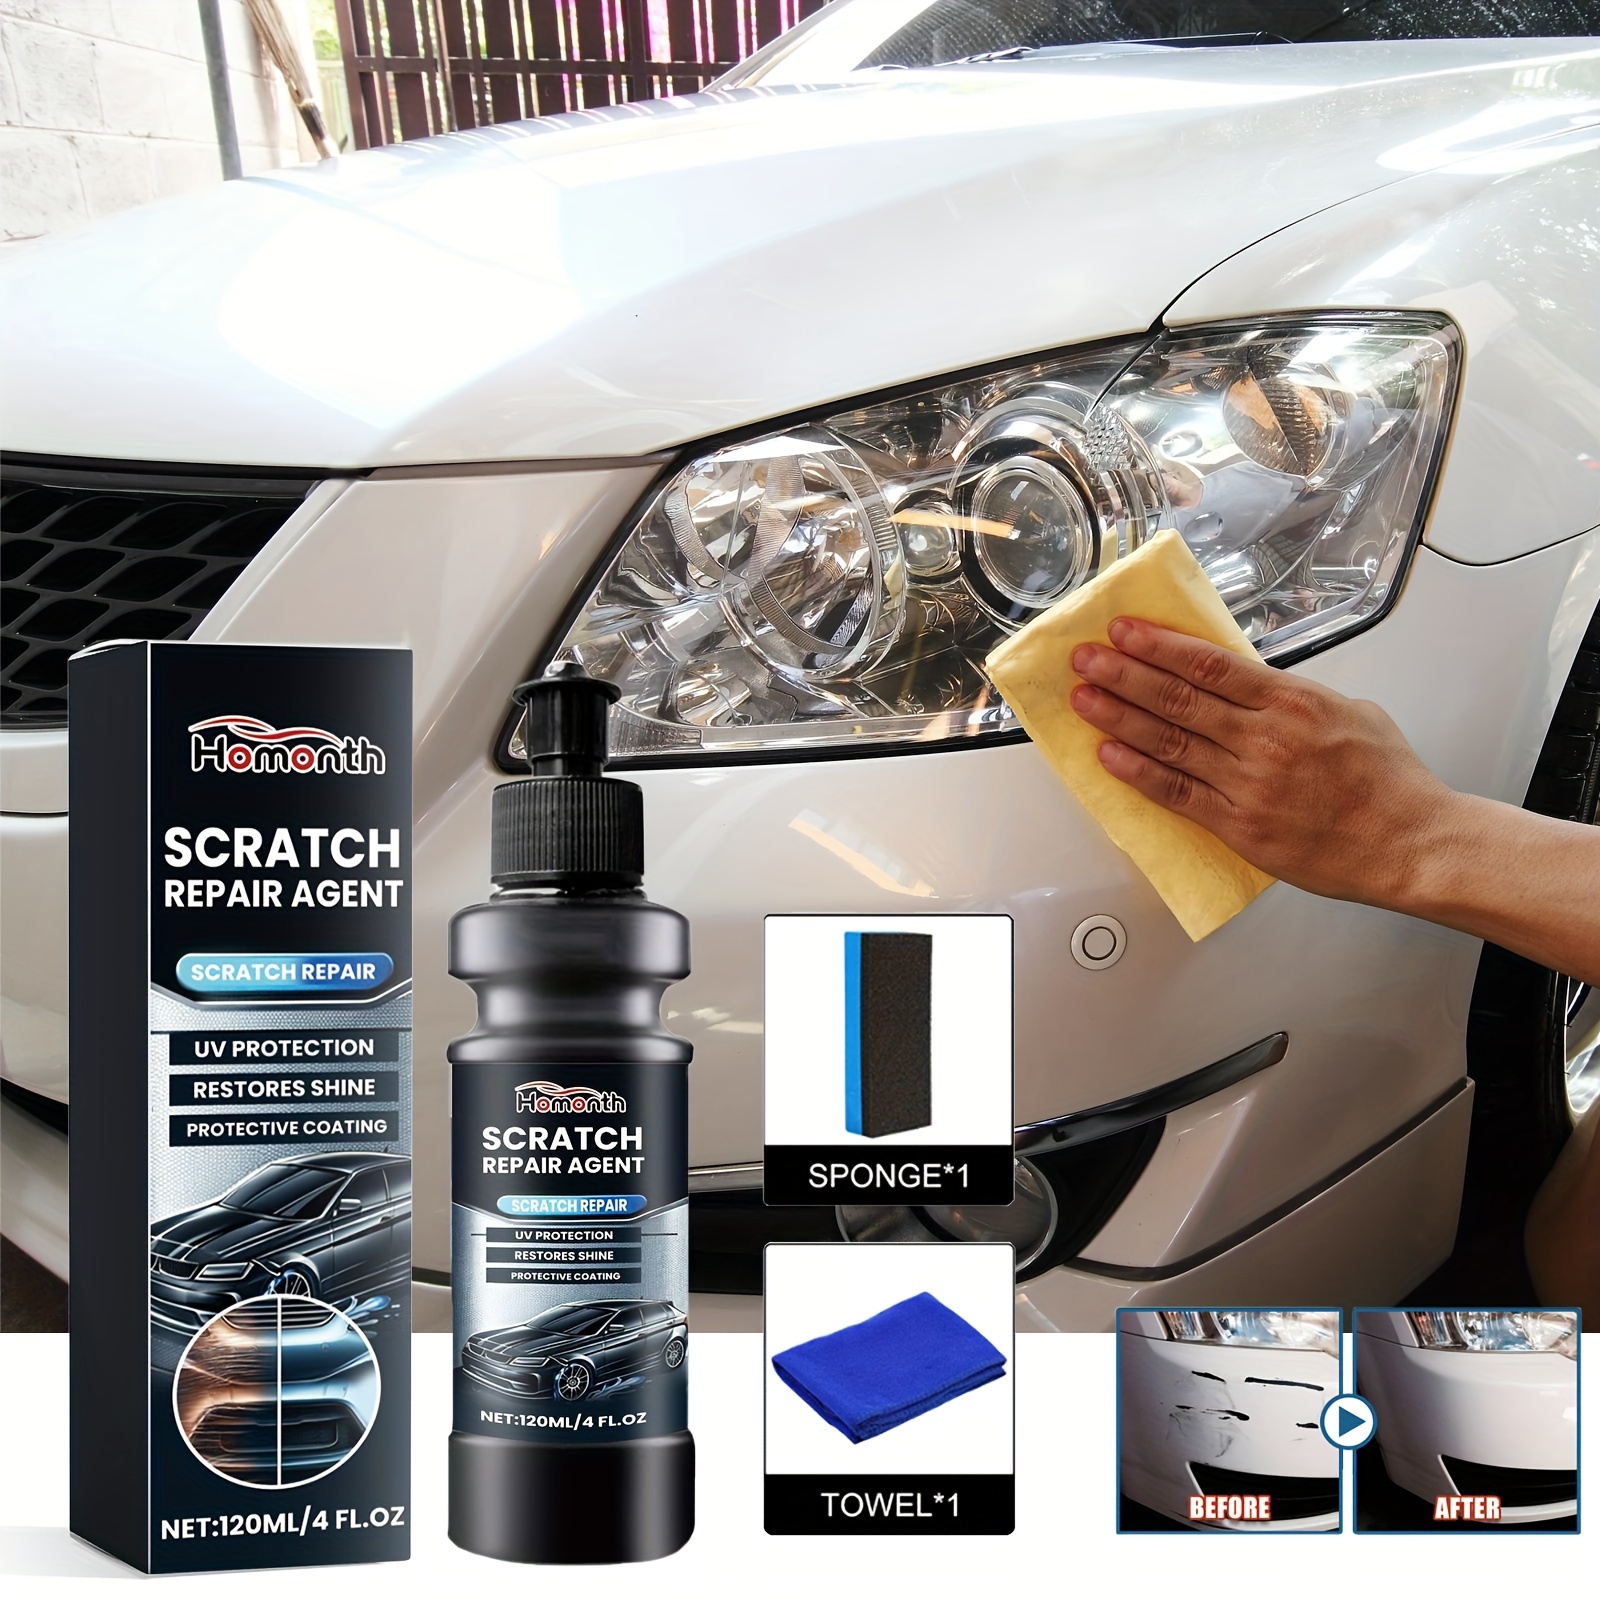 

Homonth Scratch Repair Agent Kit - Universal Car Polishing & Waxing Set With Sponge And Towel - Protective Coating For Deep Scratch Removal & Shine Restoration On Vehicle Paint